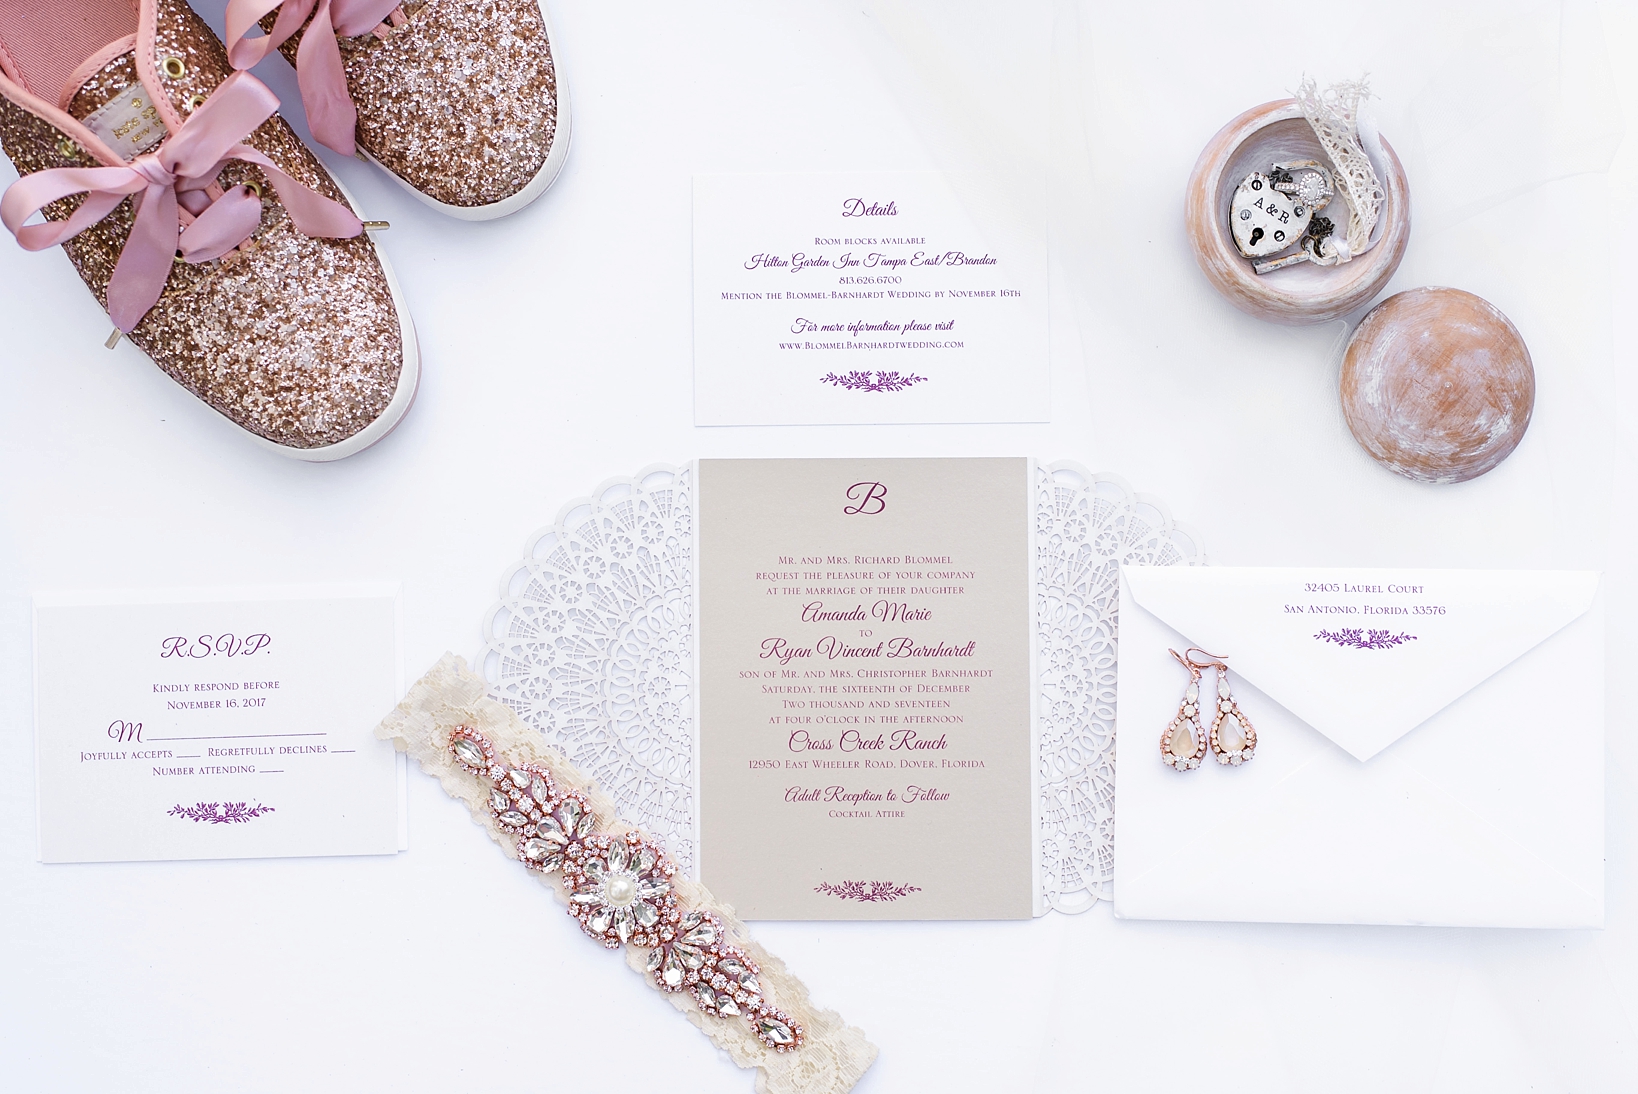 Wedding invitation suite with bridal details such as Kate Spade shoes